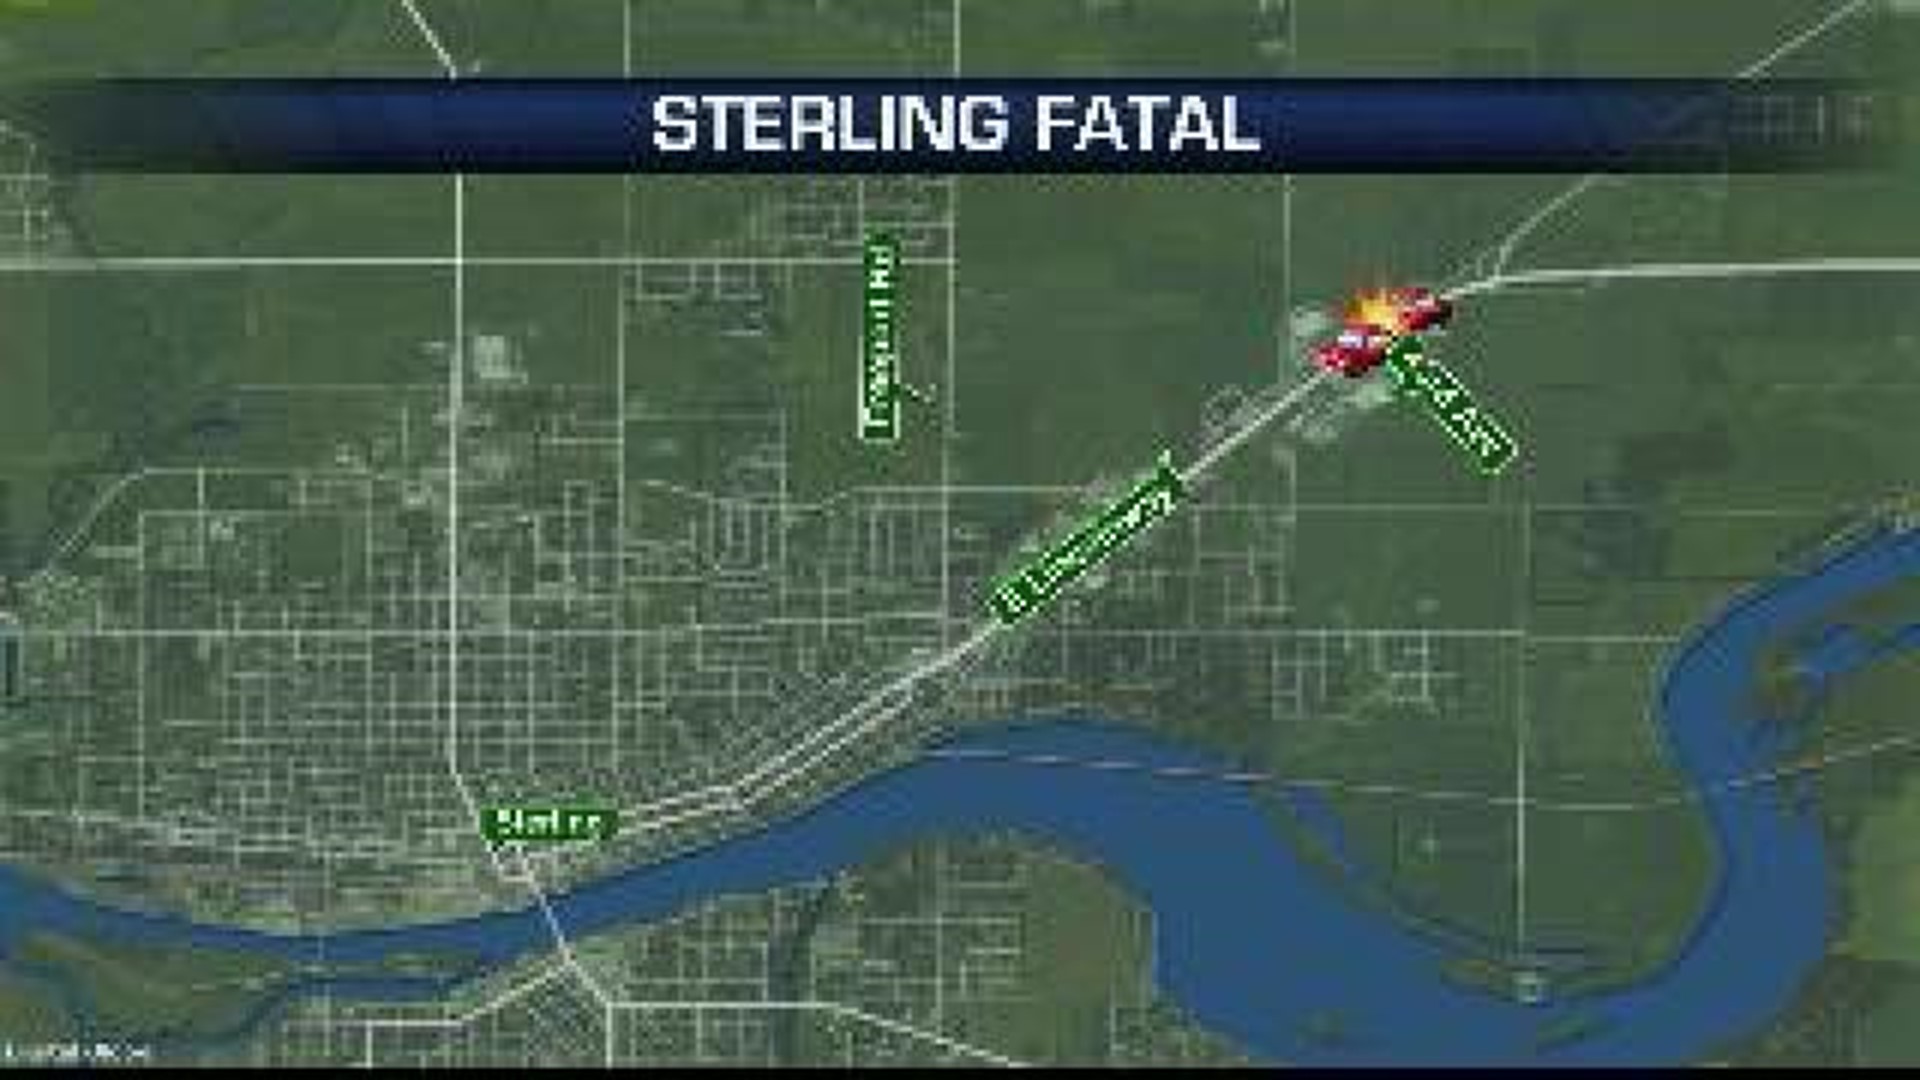 Motorcyclist dies after collision with vehicle in Sterling